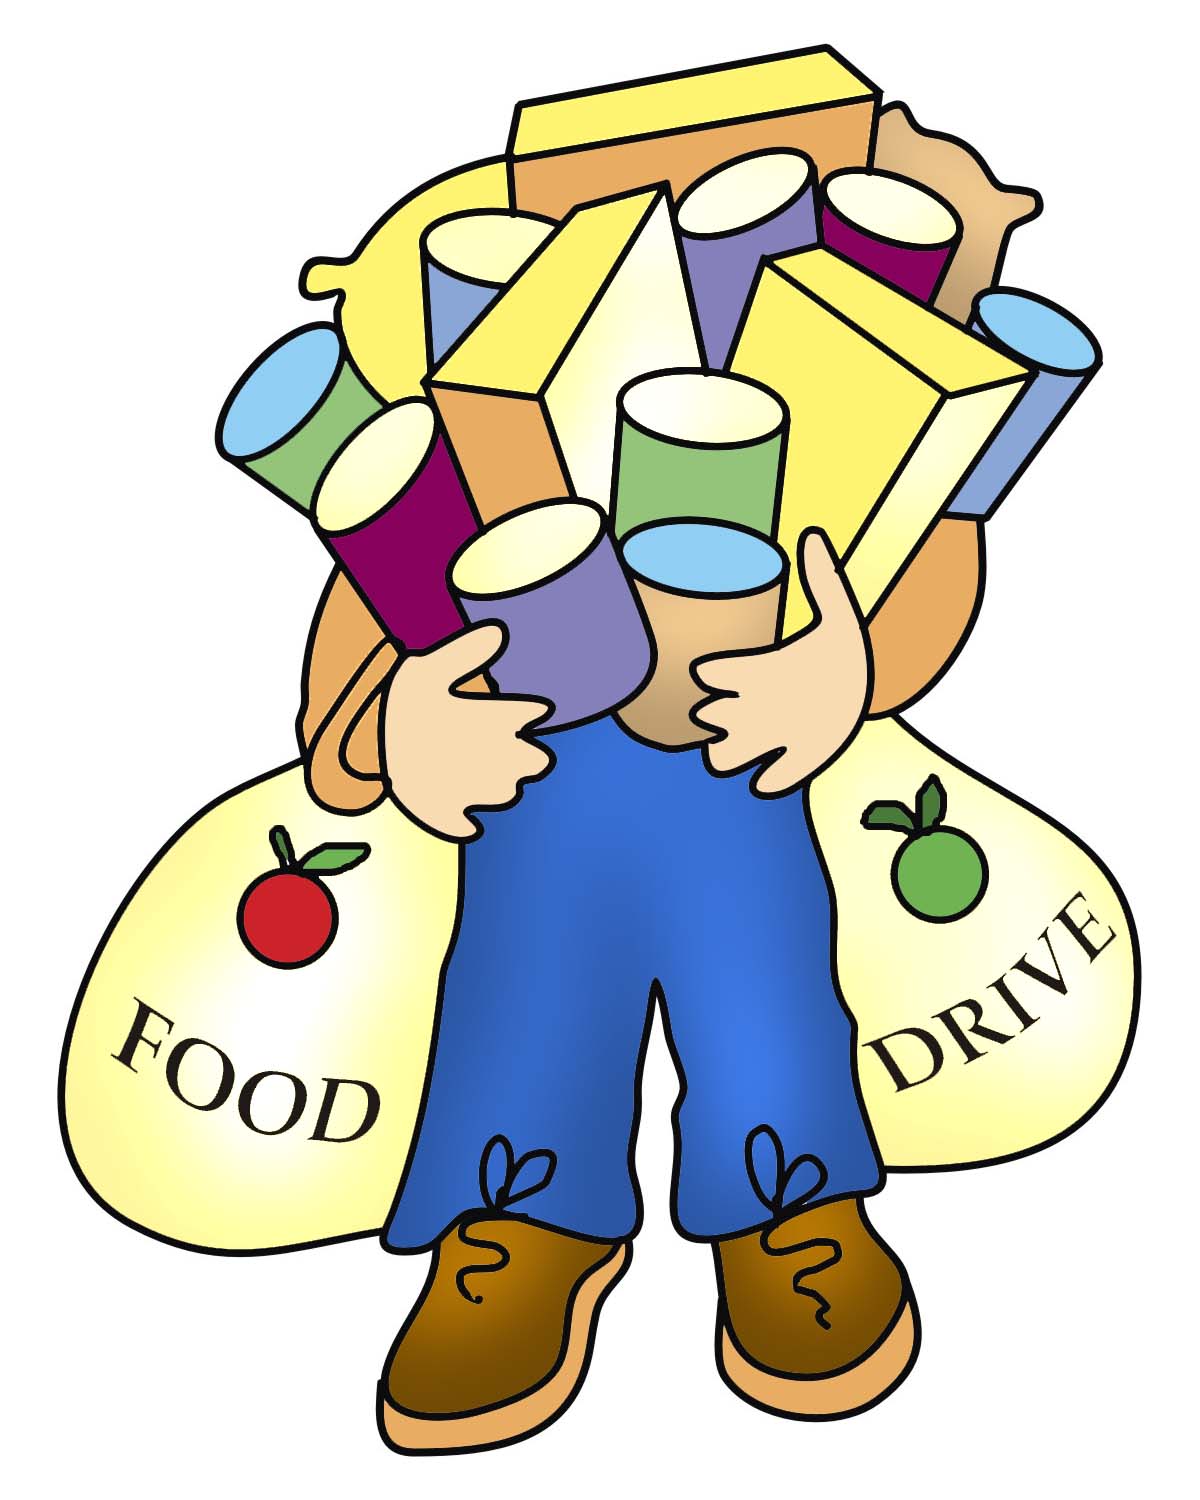 Canned Food Drive Posters - Free Clipart Images